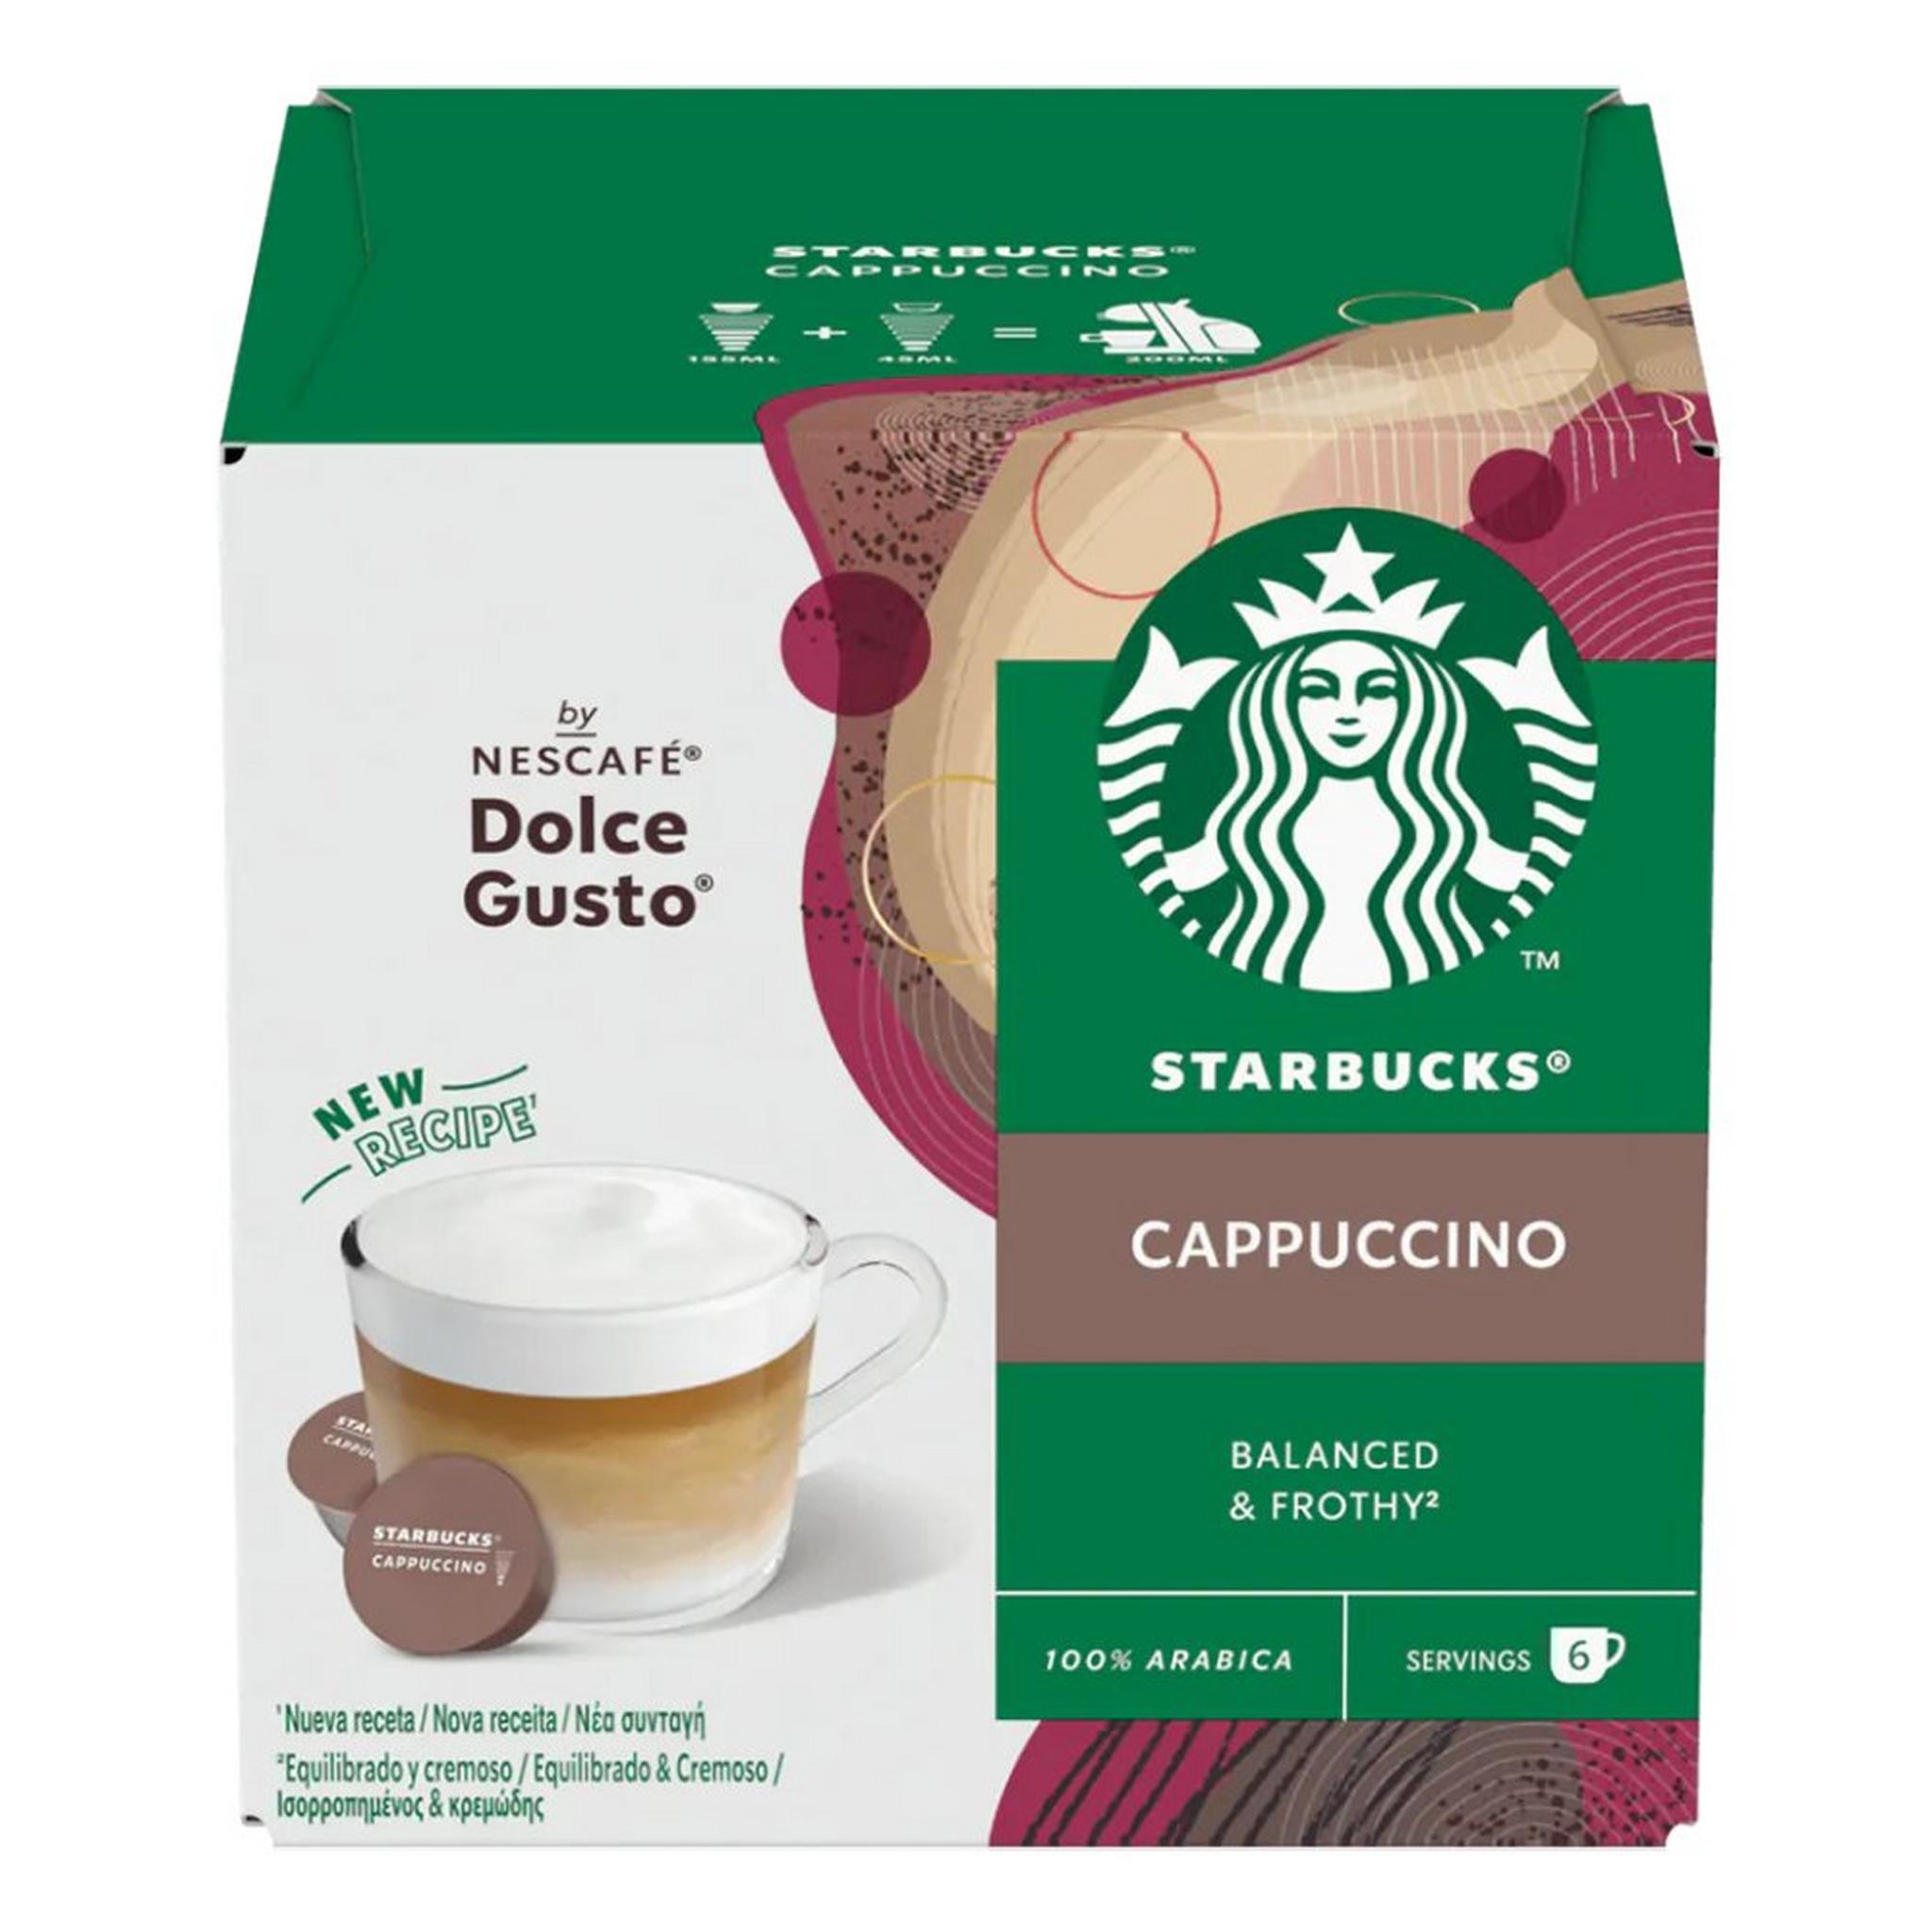 Starbucks By Dolce Gusto  Cappuccino - 12 Capsules